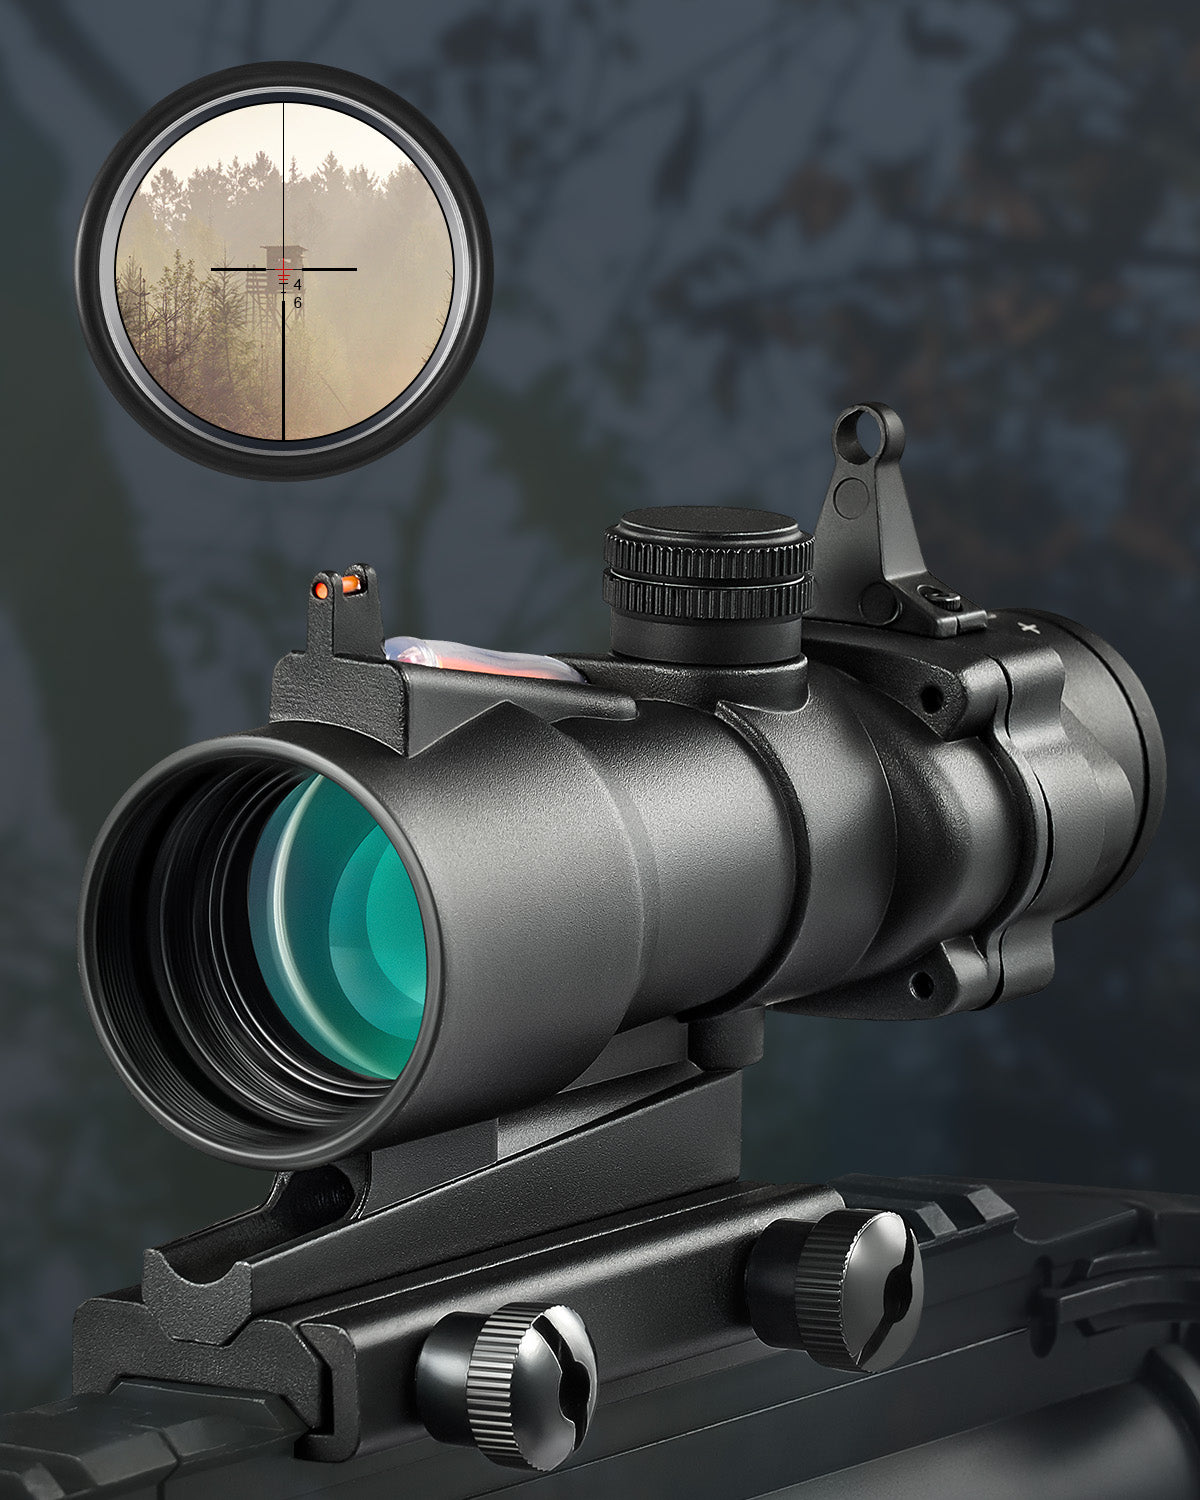 4x32 Prism Scope, Compact Tactical Rifle Scope with Fiber Reticle Sight, Iron Sights, Multicoated Lenses, Fits 20 mm Picatinny